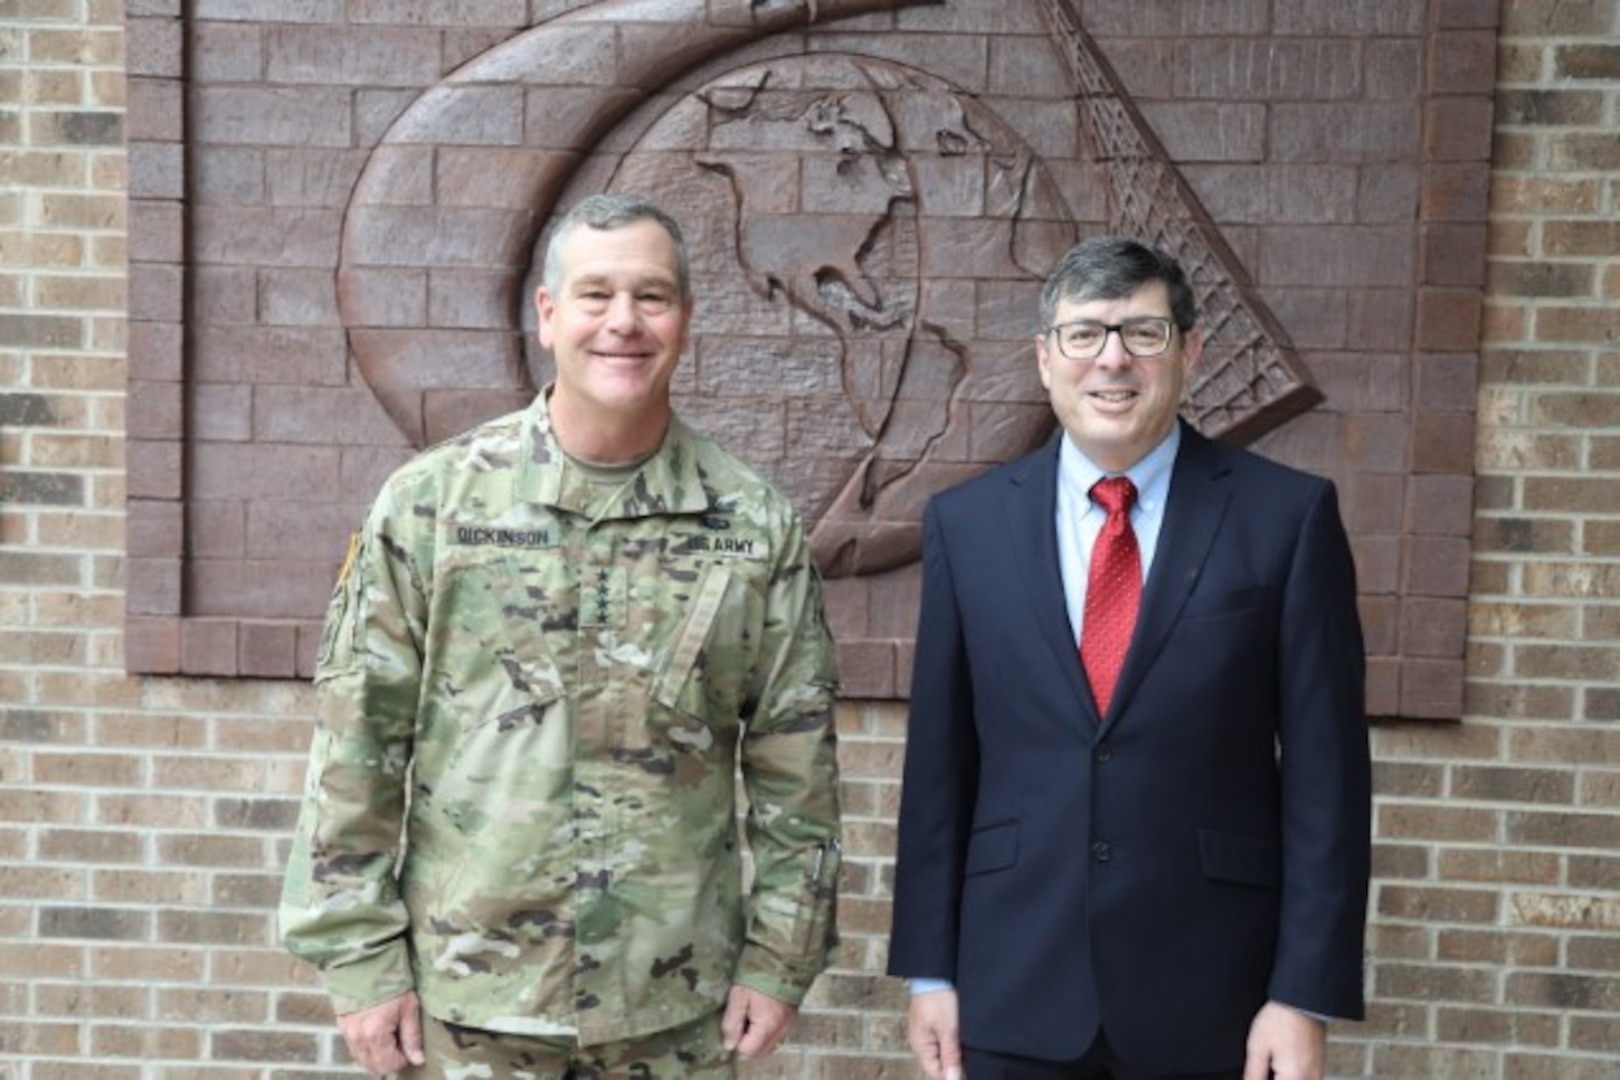 Commander USSPACECOM GEN James Dickinson and Director NRO Chris Scolese discuss opportunities for collaboration at NRO on September 2, 2020.